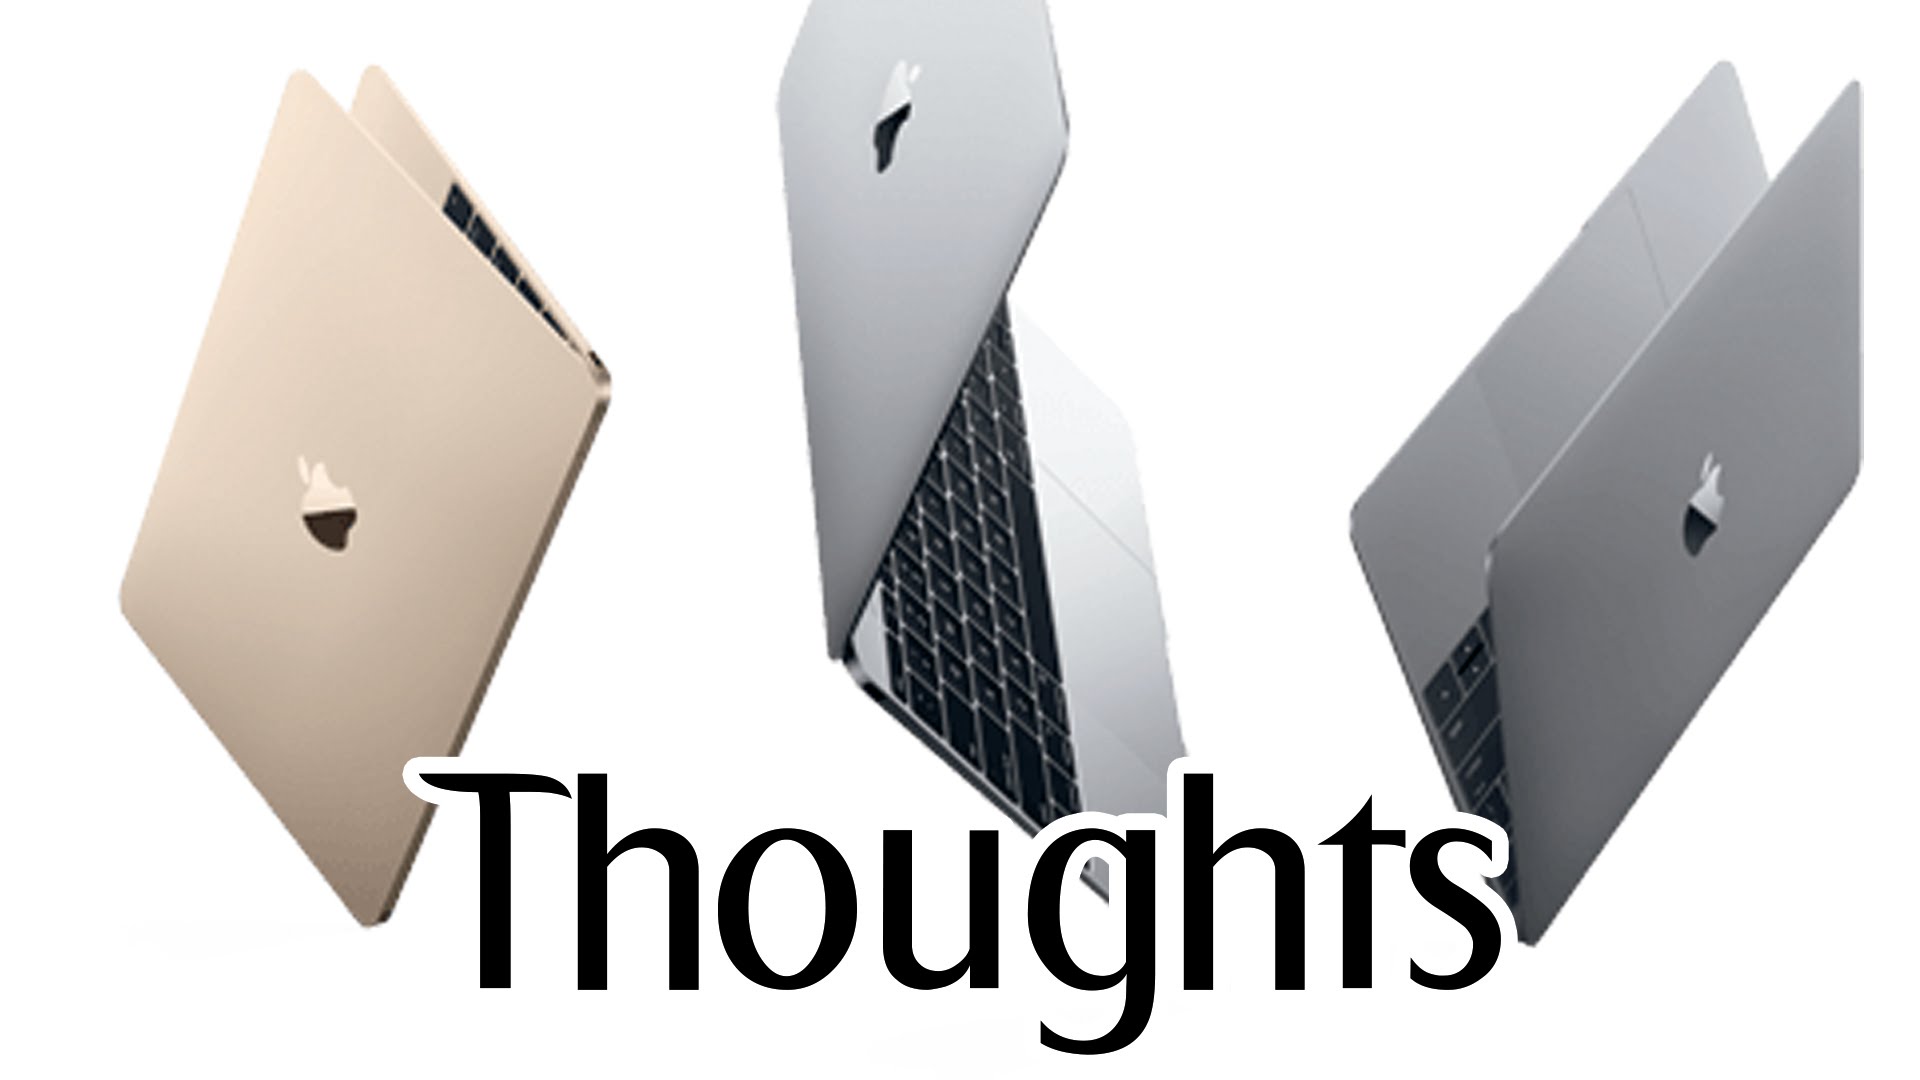 Thoughts - The New MacBook